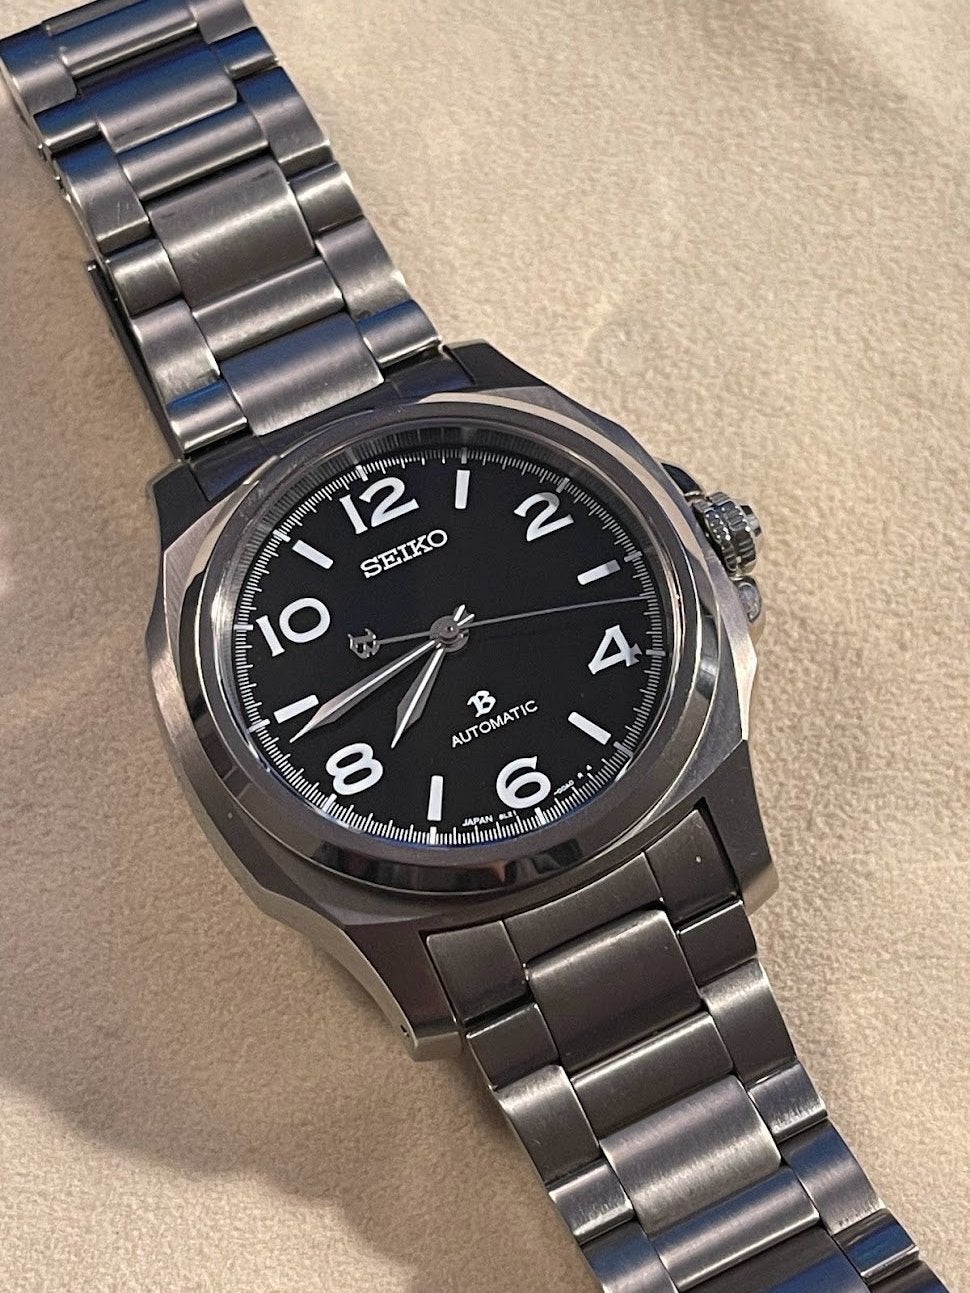 My SAGL003 purchase and service experience | The Watch Site